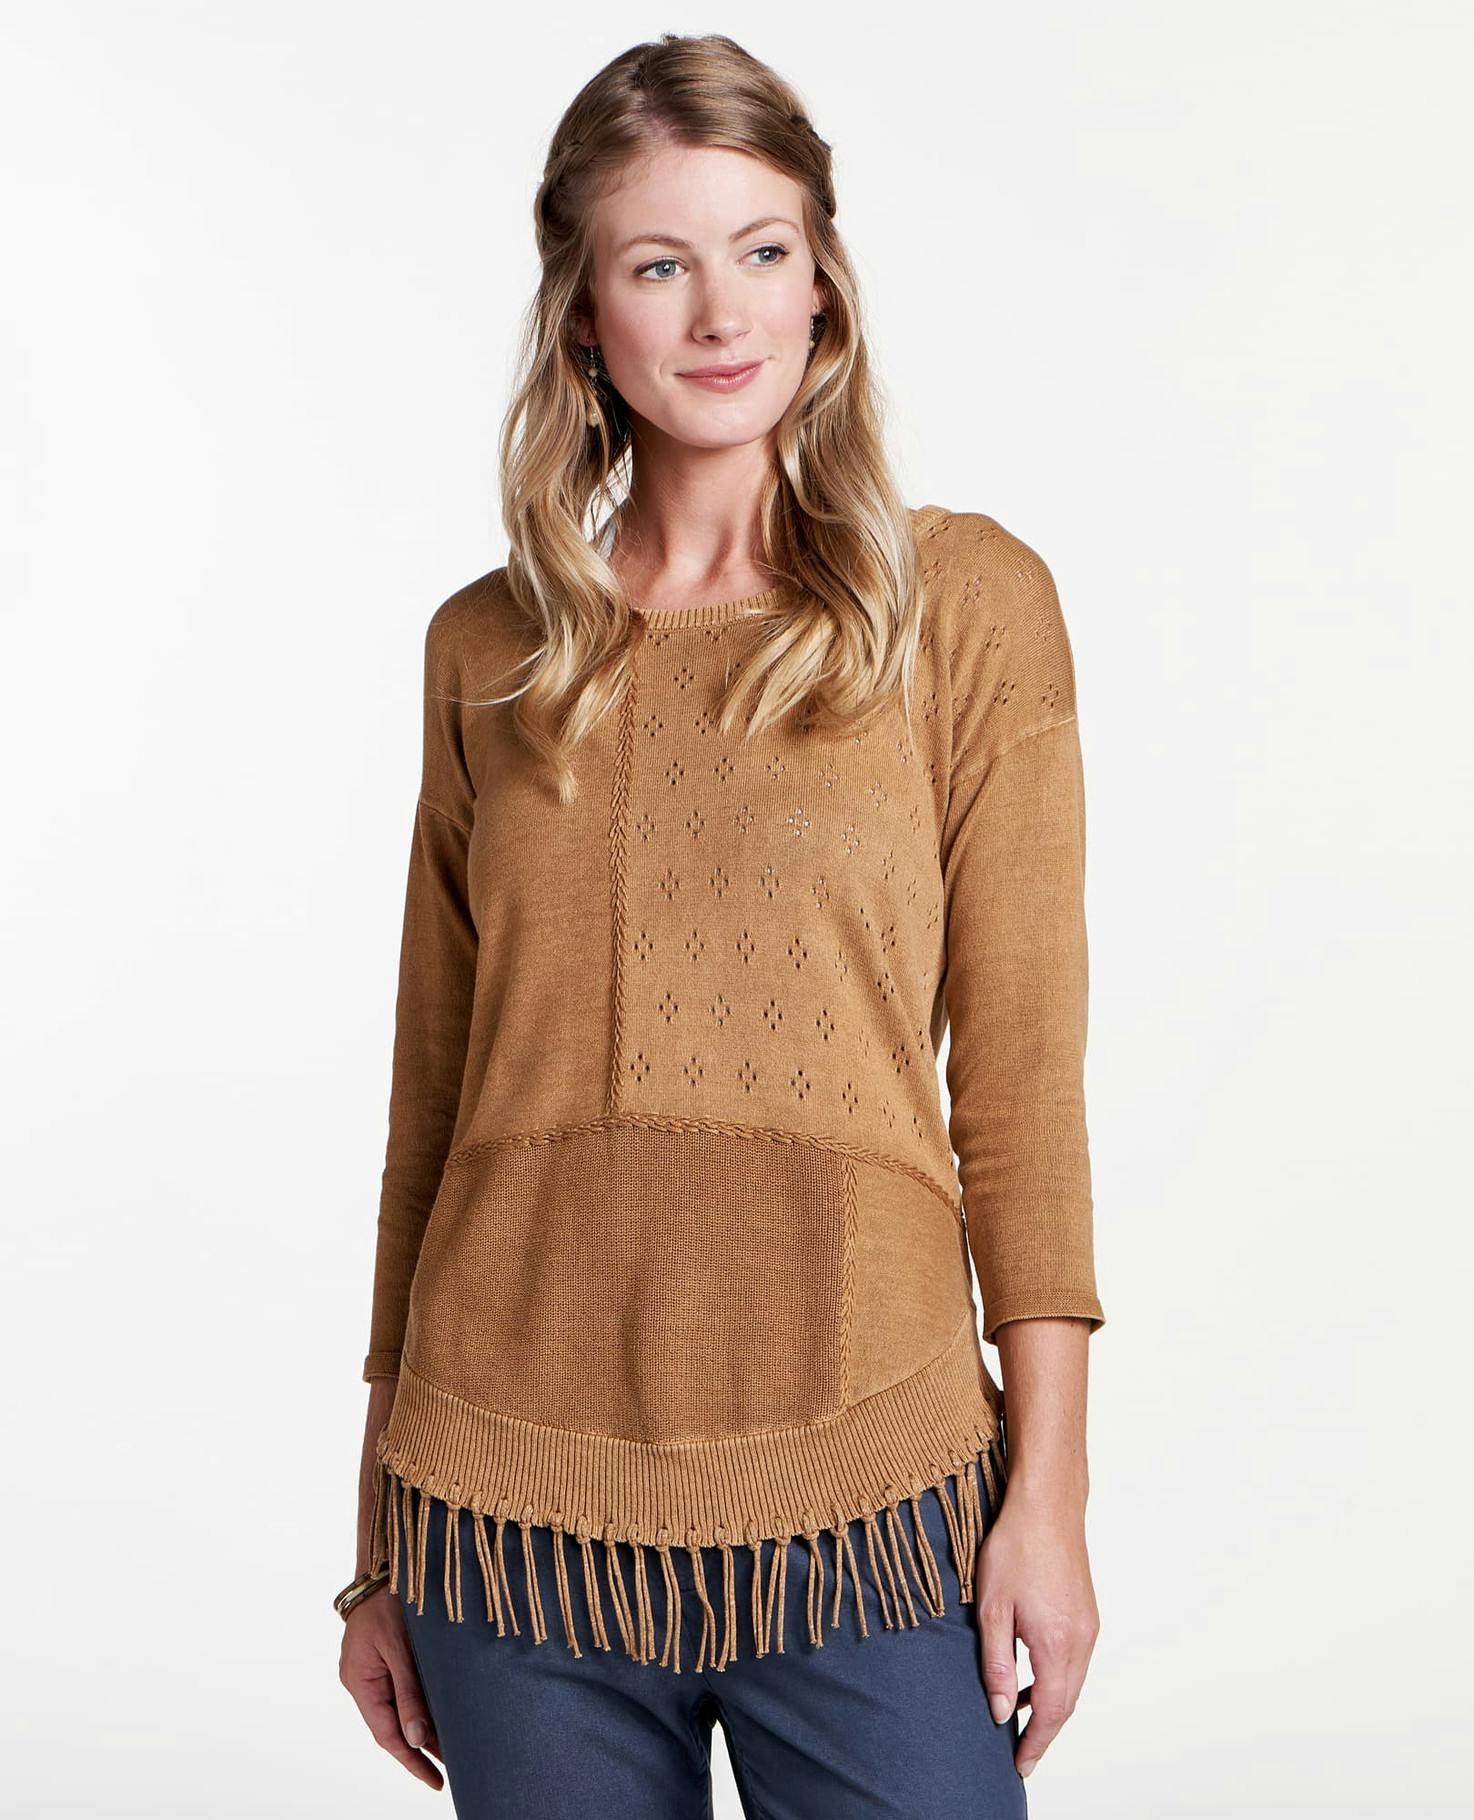 Toad&Co. Women's Woodstock Pullover